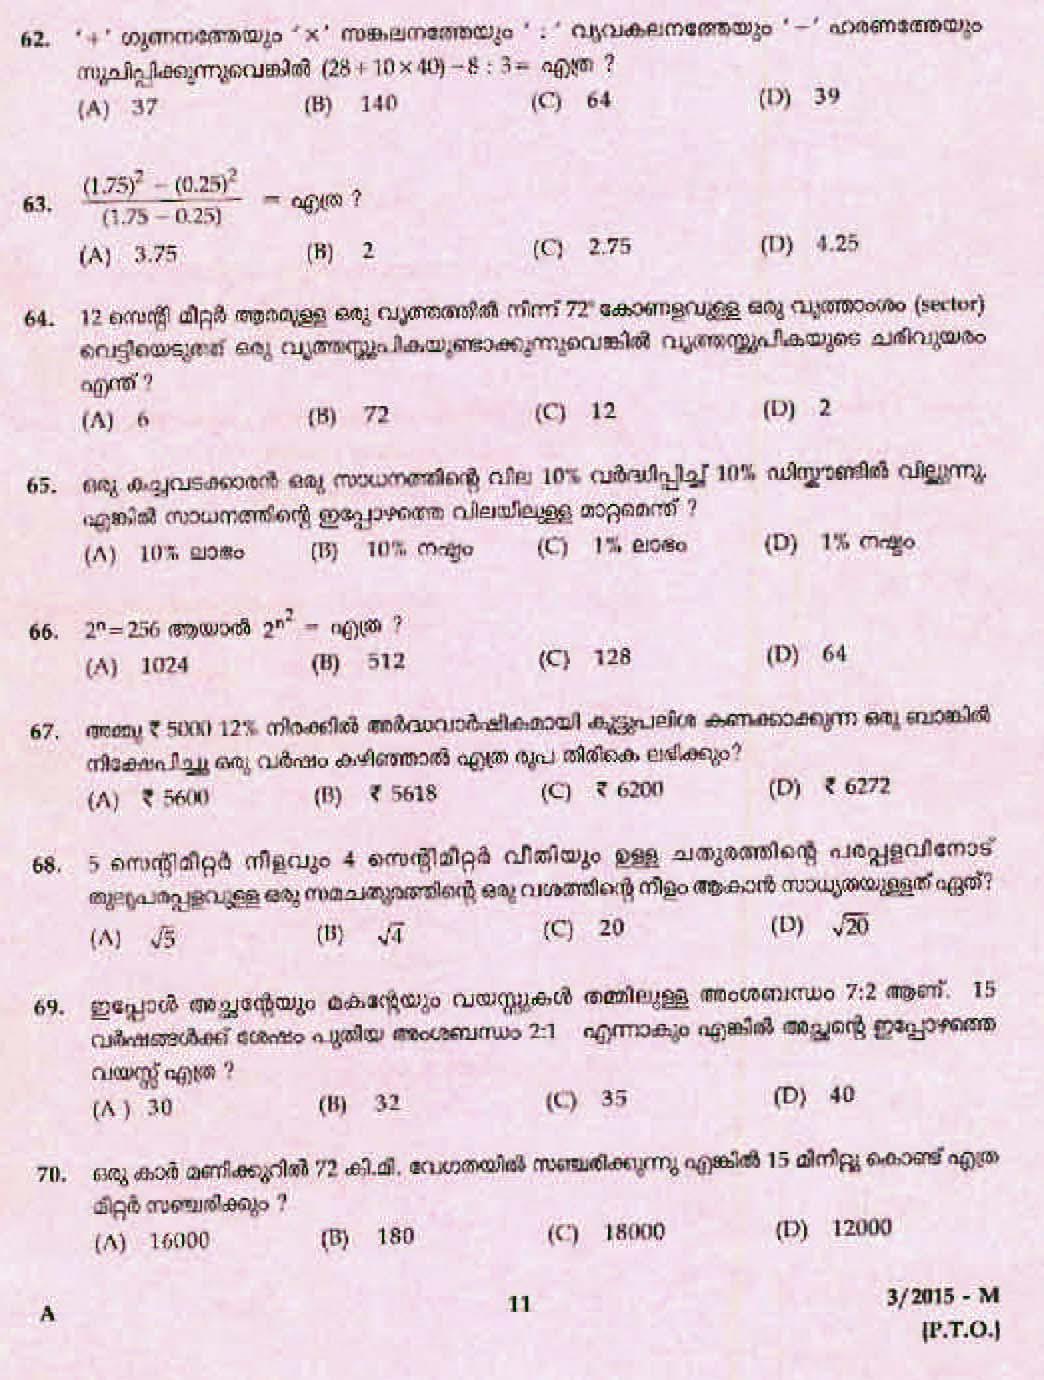 LD Clerk Thrissur District Question Paper Malayalam 2015 Paper Code 32015 M 9